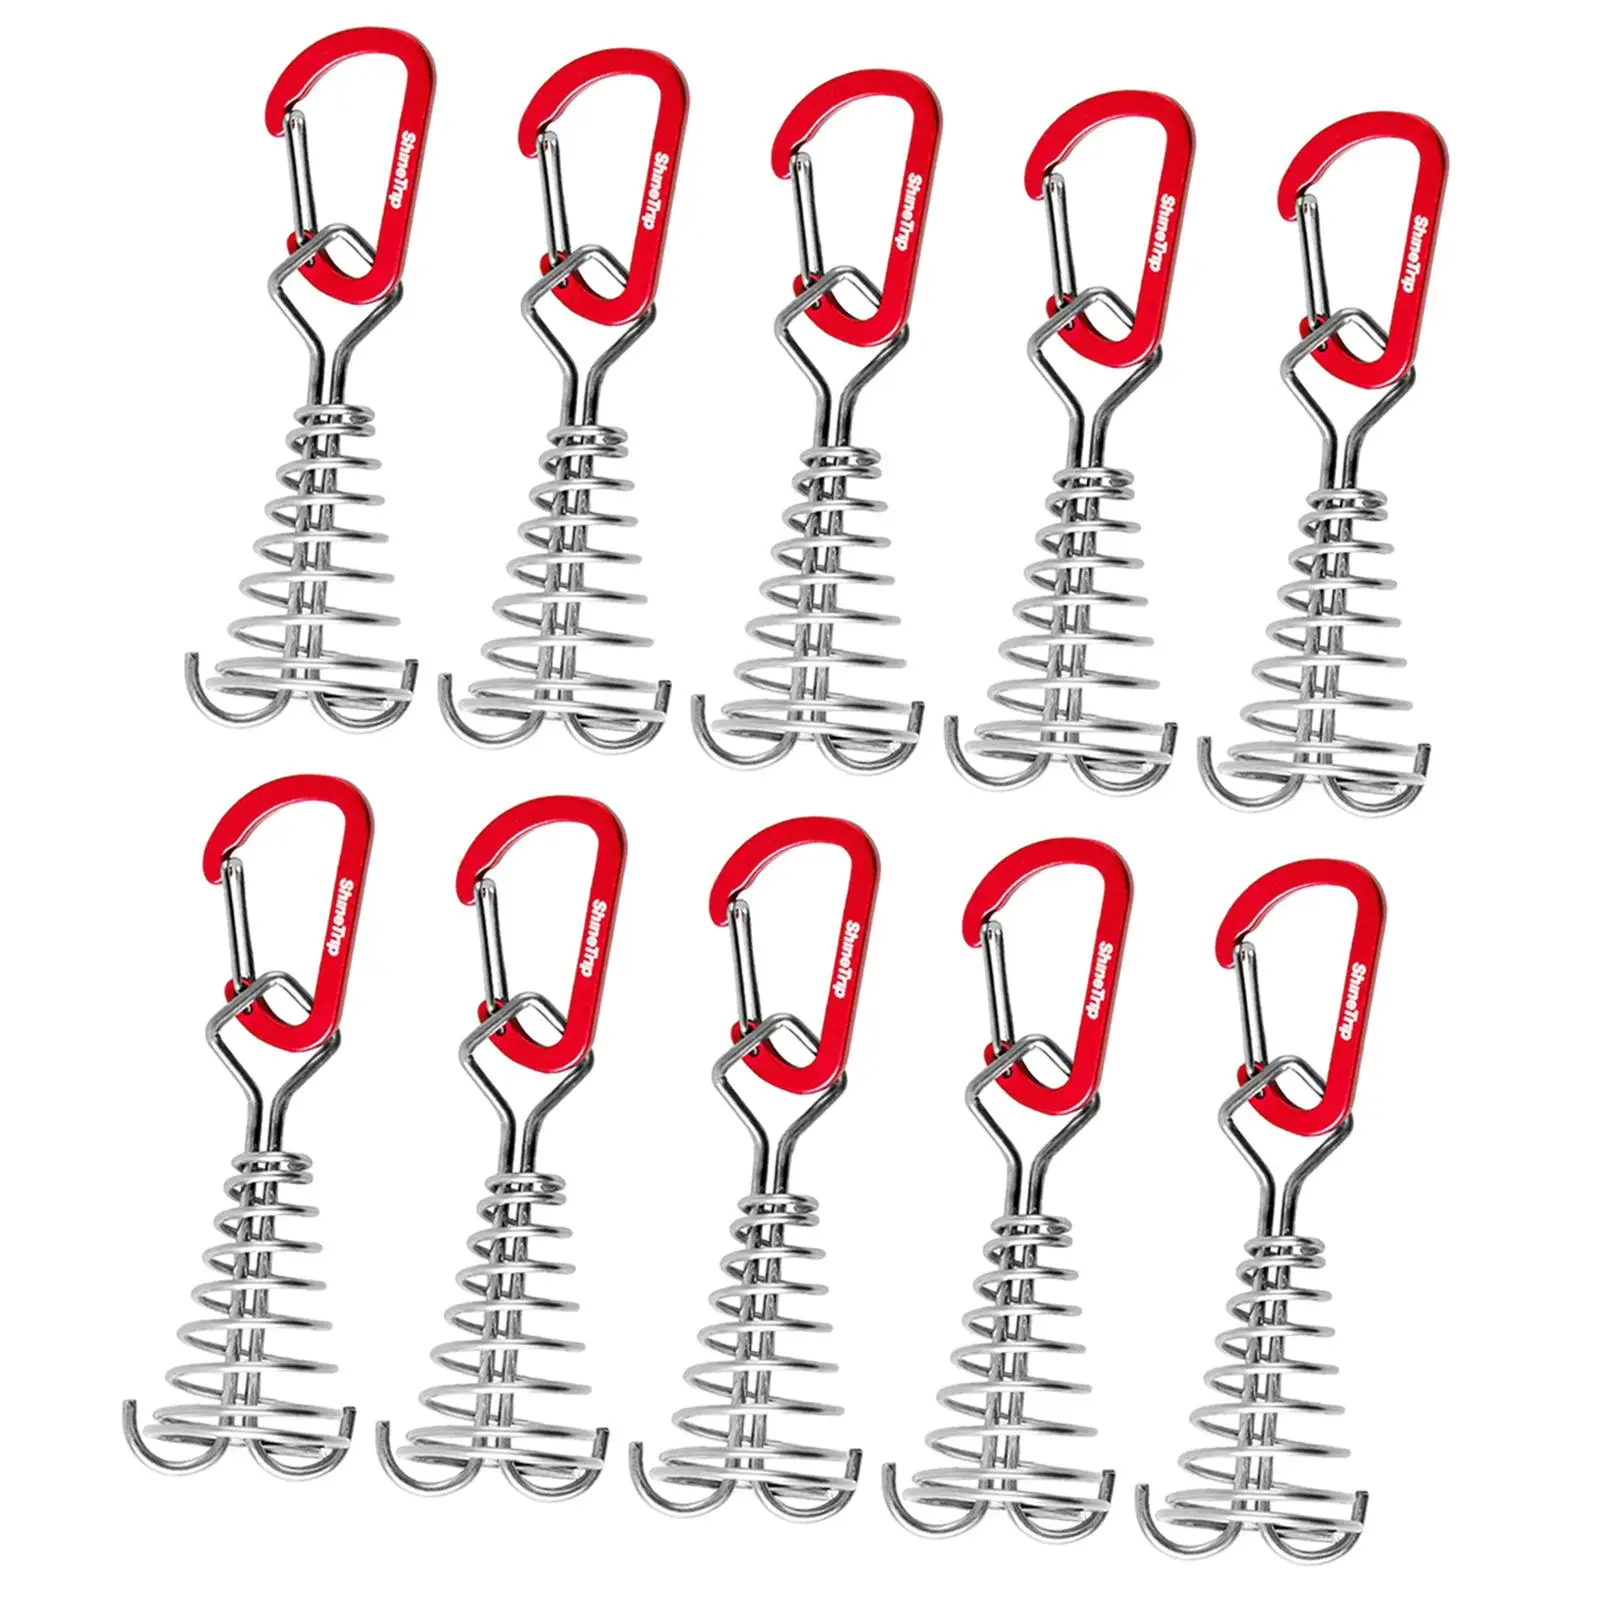 10Pcs Deck Anchor Pegs Wind Rope Anchor Windproof Tent Anchors with Carabiners for Outdoor Hiking Wood Platform Accessories